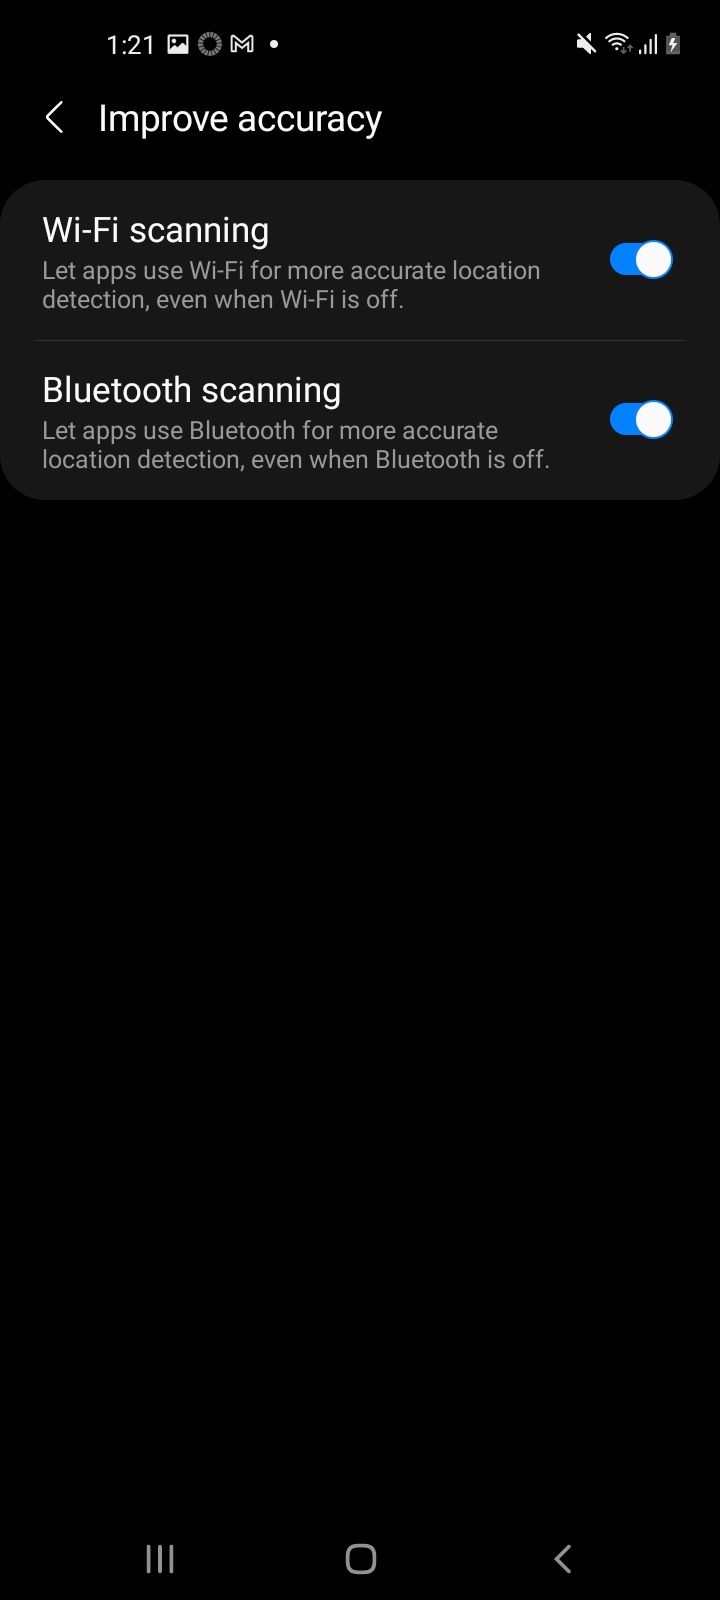 Improving location settings in Android phone